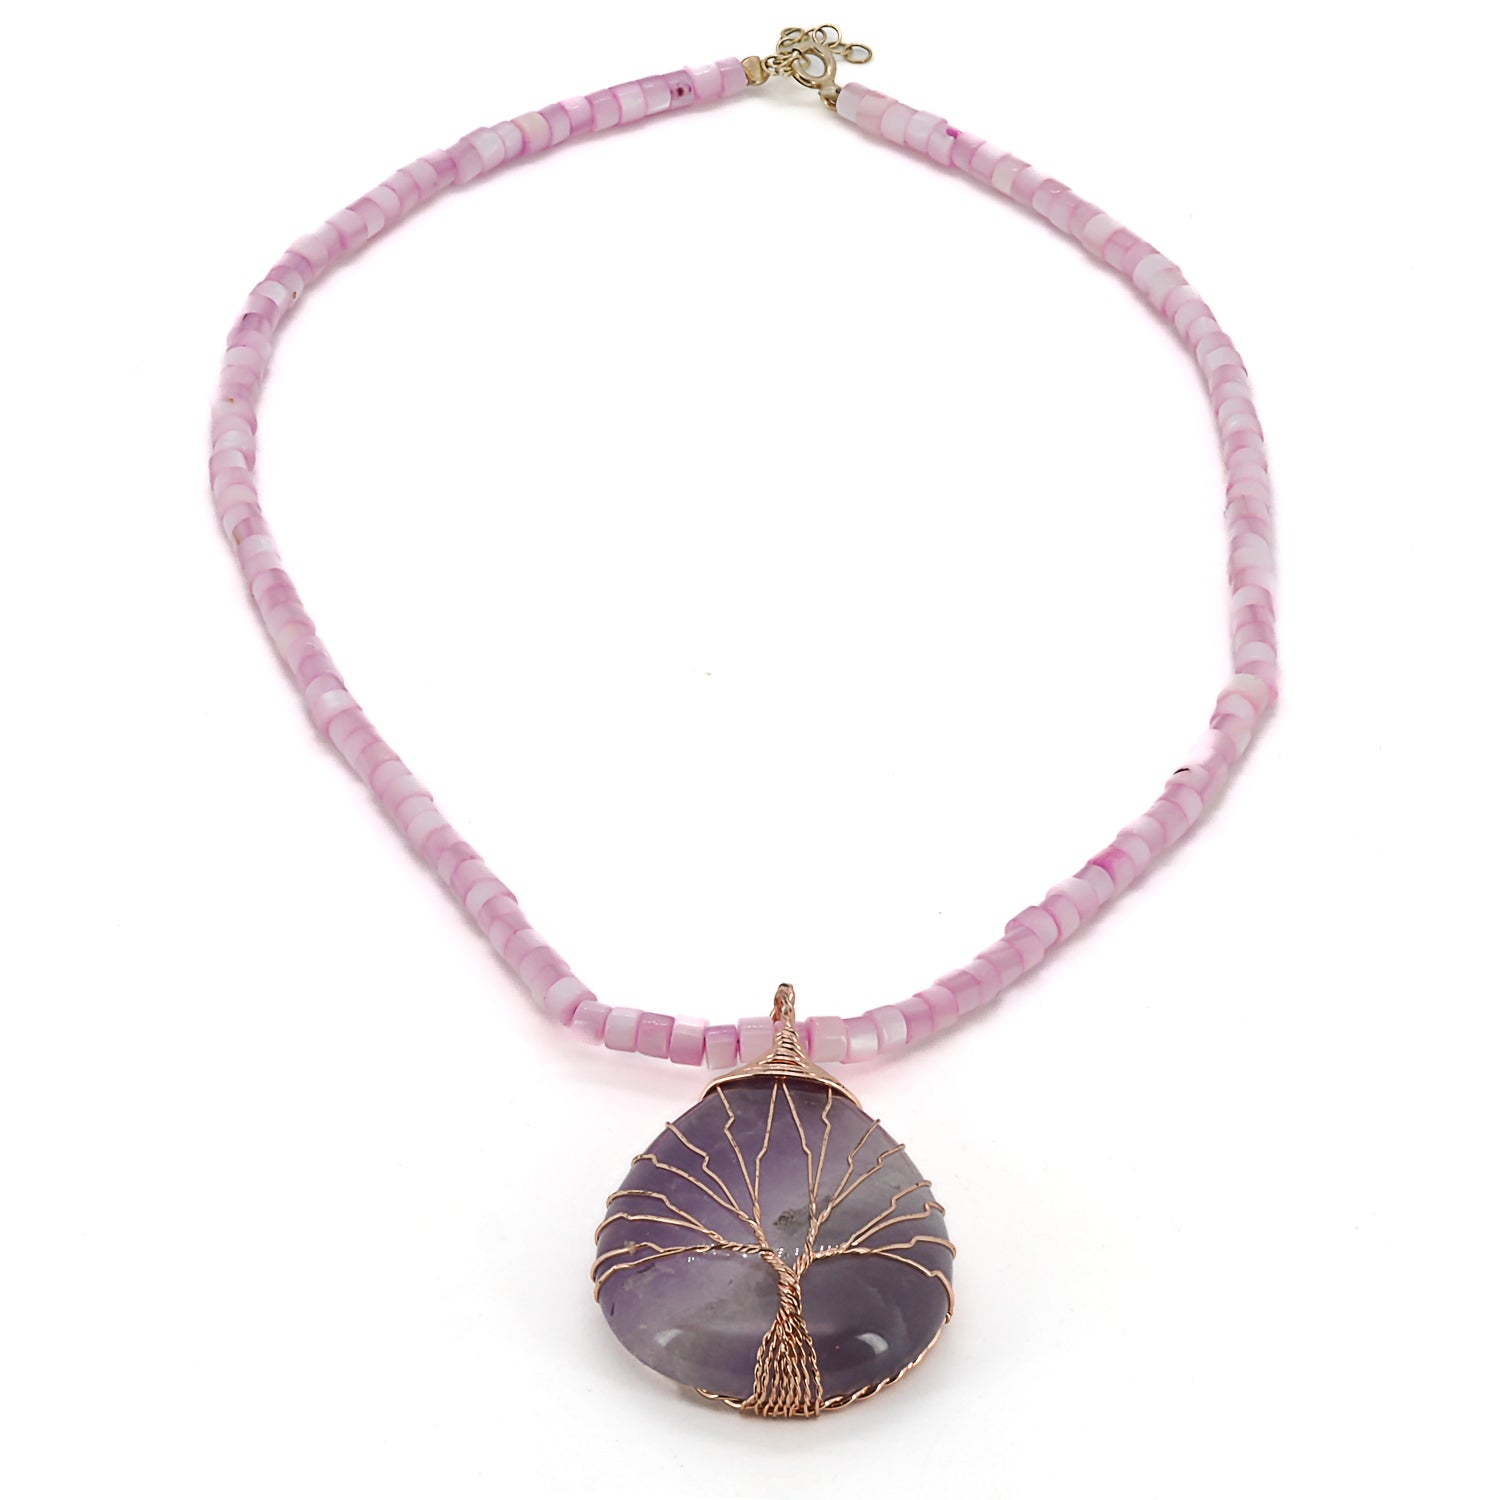 Elevate your style and nurture your well-being with the Amethyst Healing Tree Necklace, a unique accessory crafted with care and meaning.